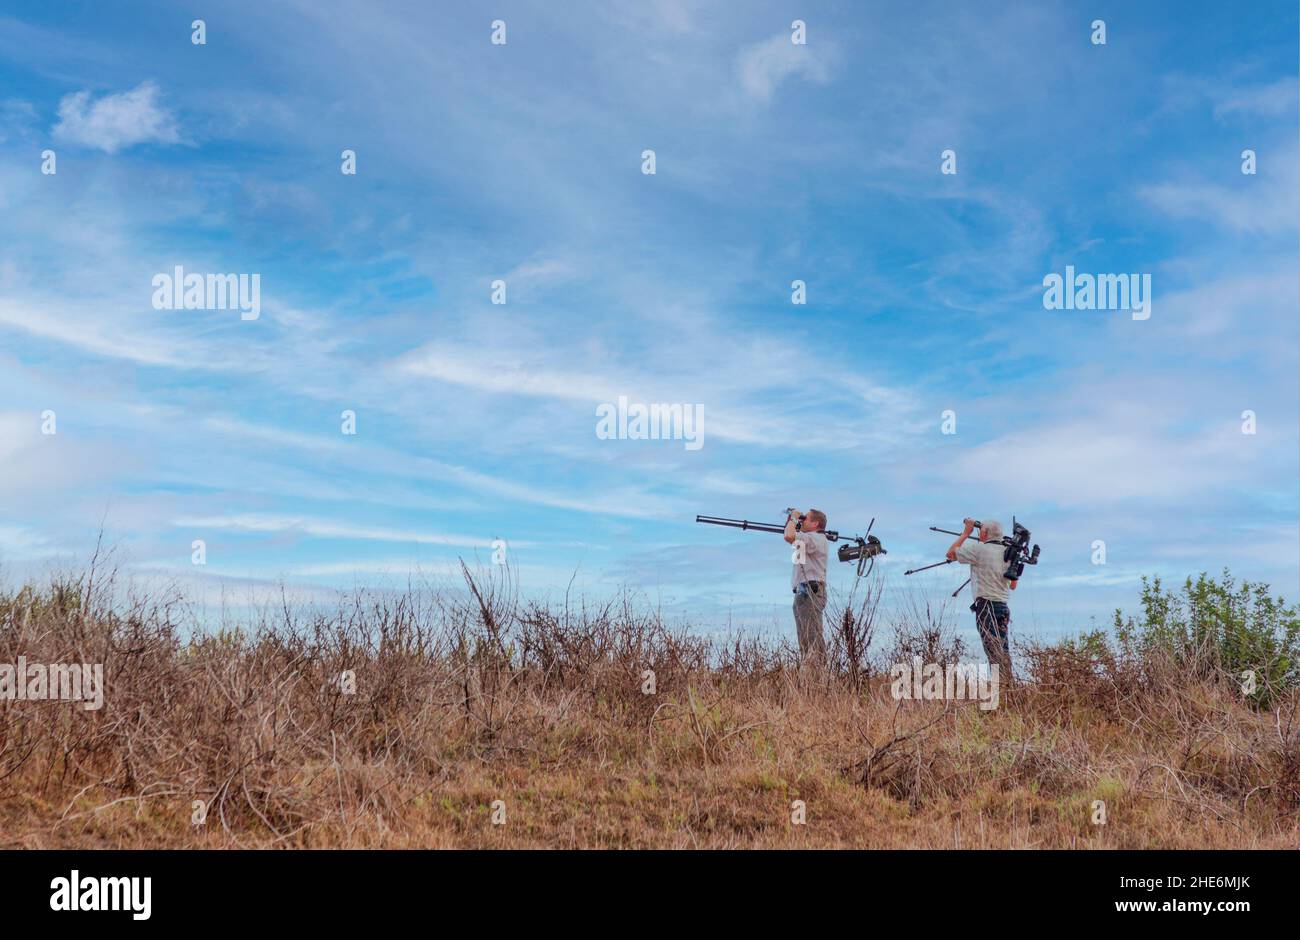 Birdwatchers with their equipment at the mouth of the Rio Guadalhorce, Malaga, Malaga Province, Andalusia, southern Spain. Stock Photo